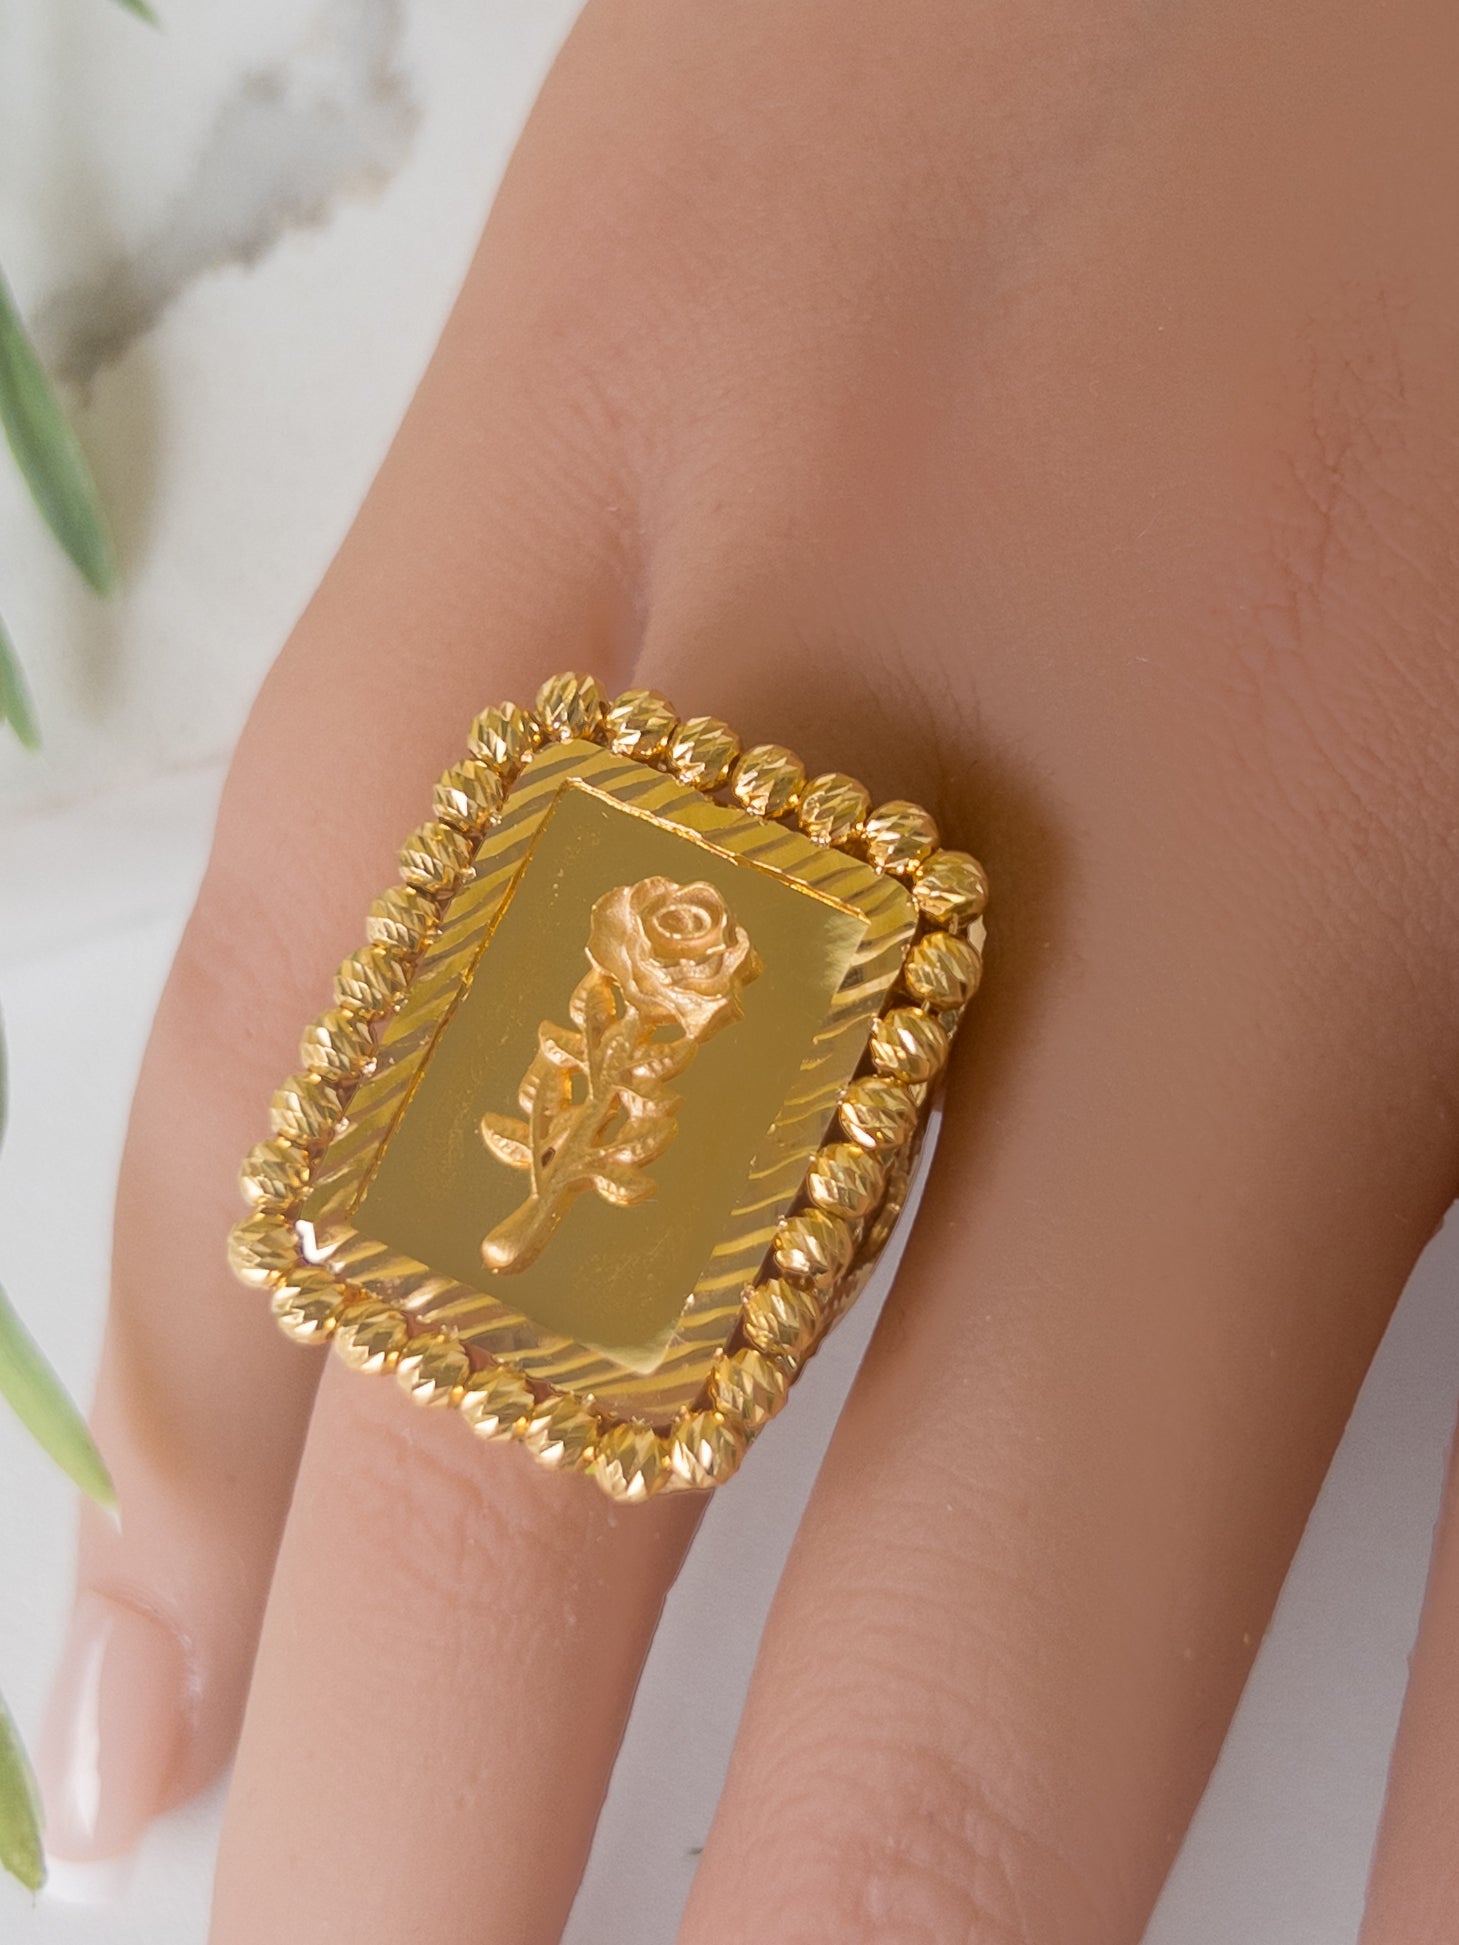 21k Gold Ring - Cleopatra Jewelers